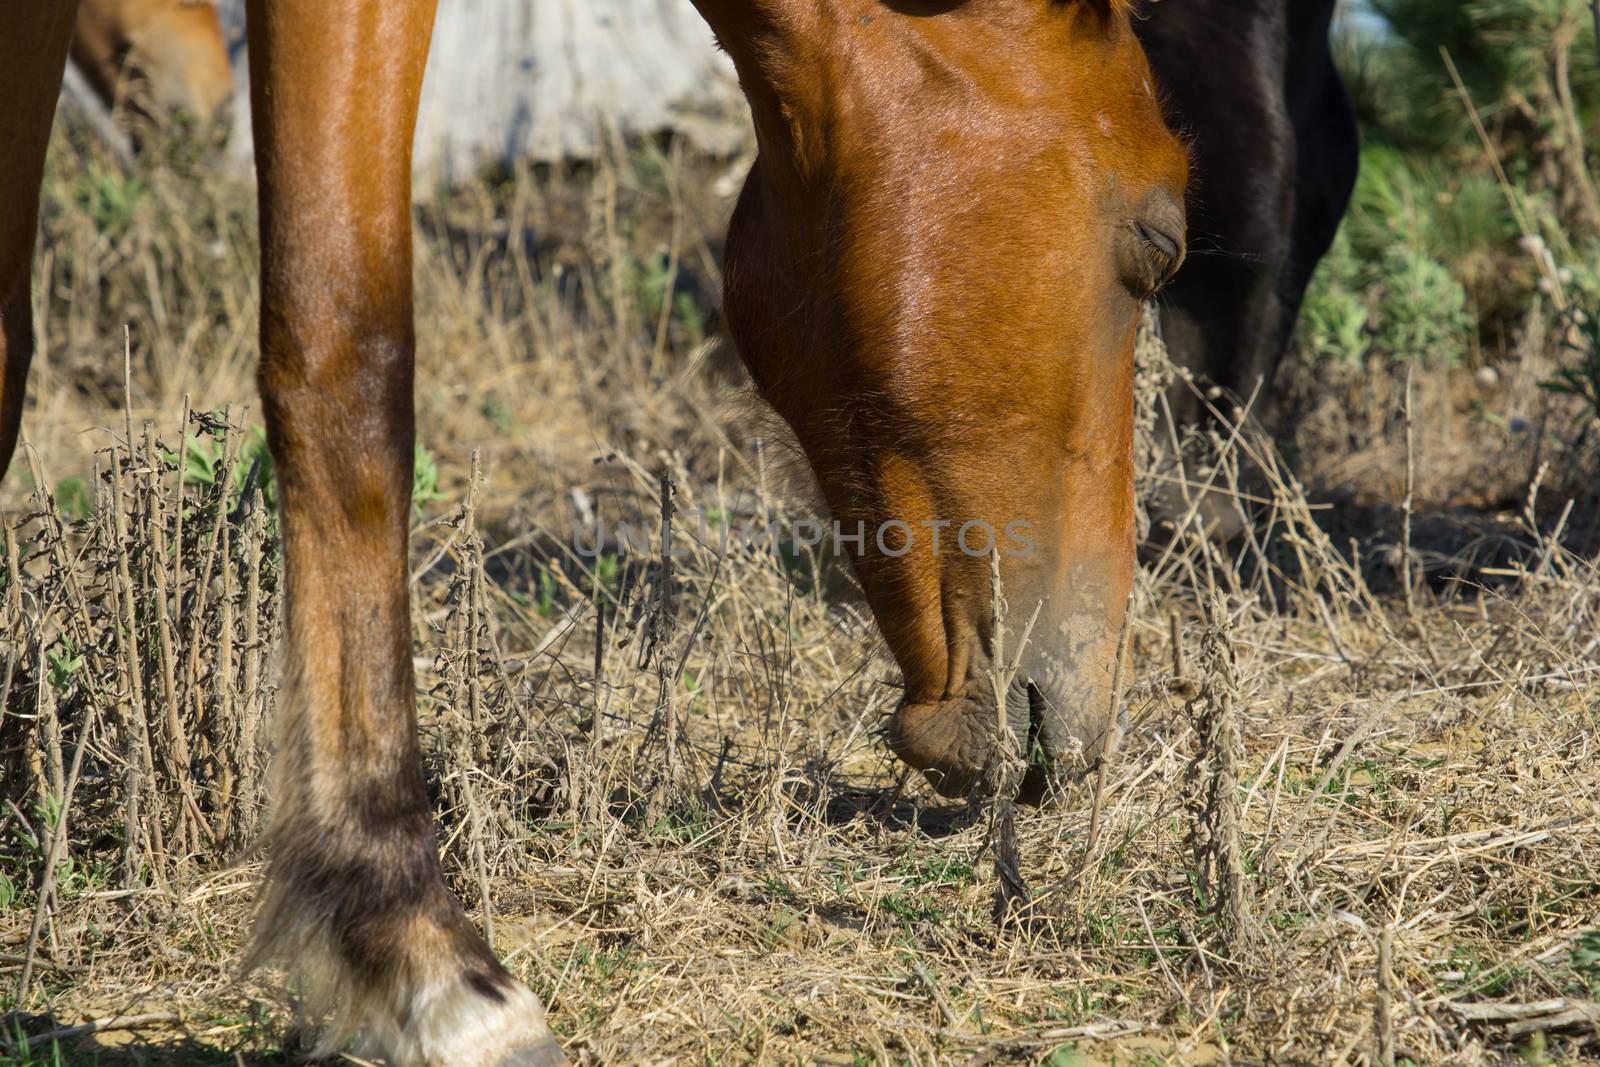 Wild horses in forestry Whalers Road  Ninety Mile Beach closeup grazing by brians101